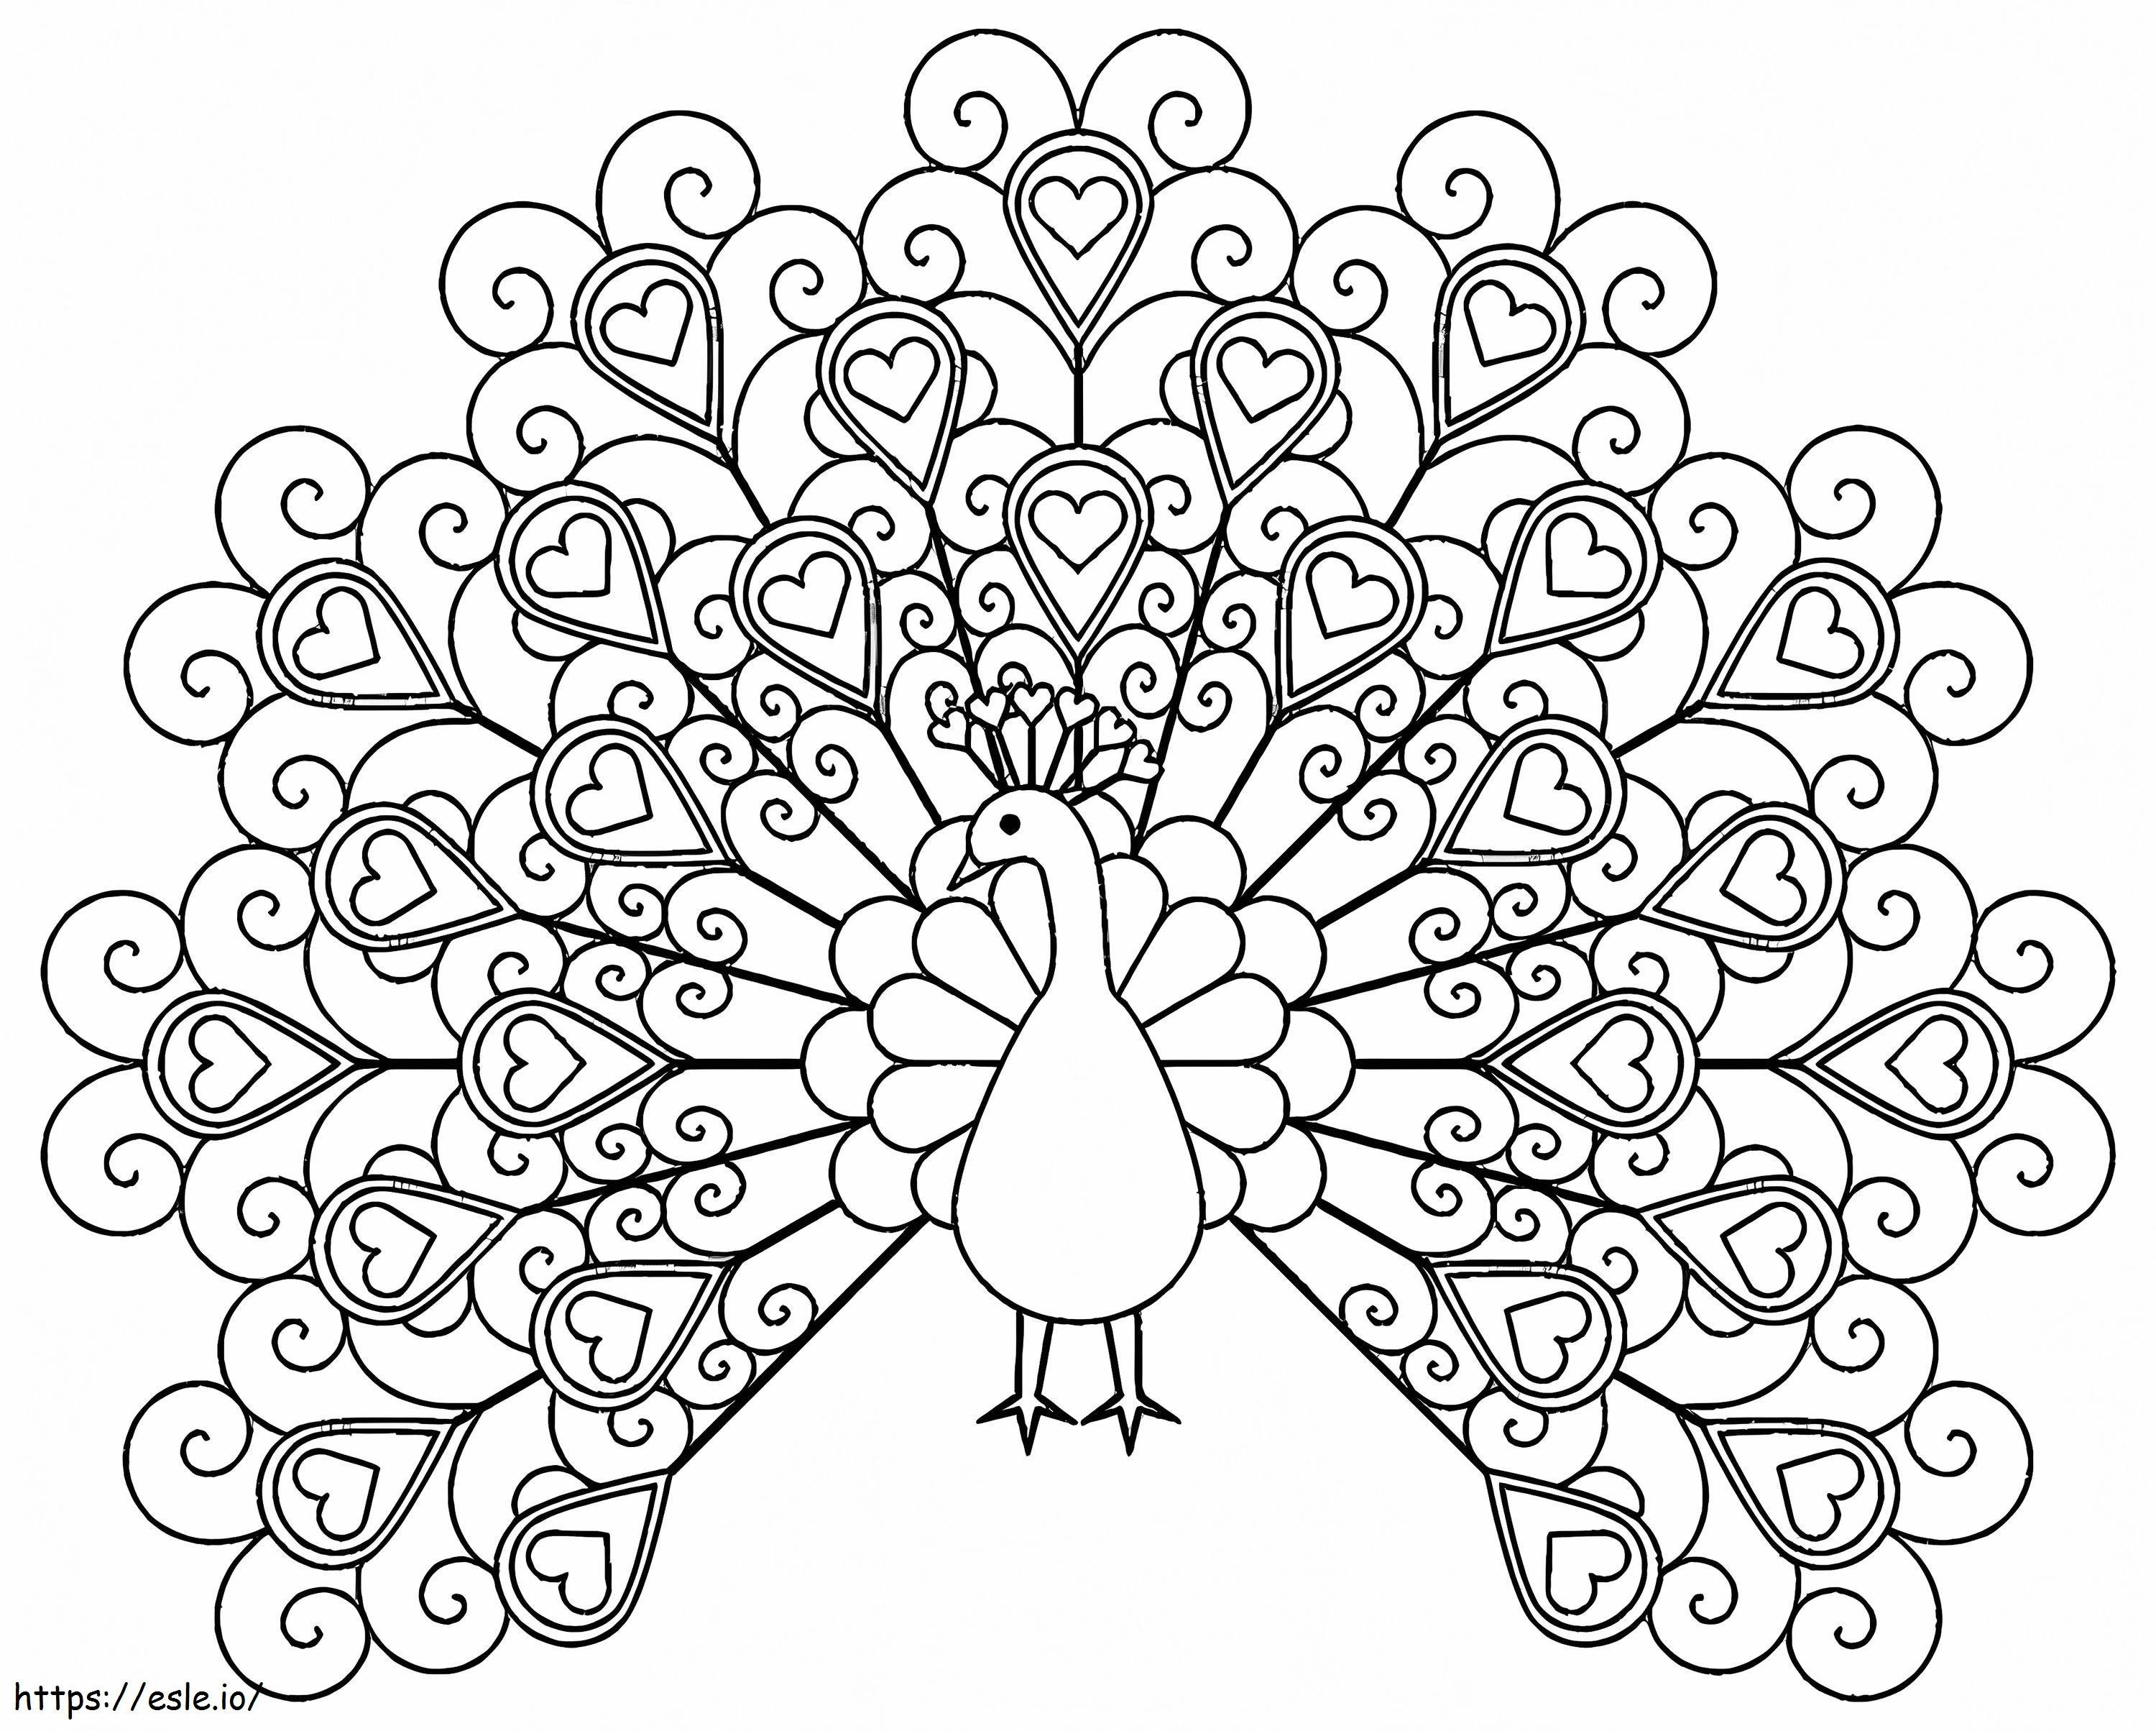 Peacock To Color coloring page